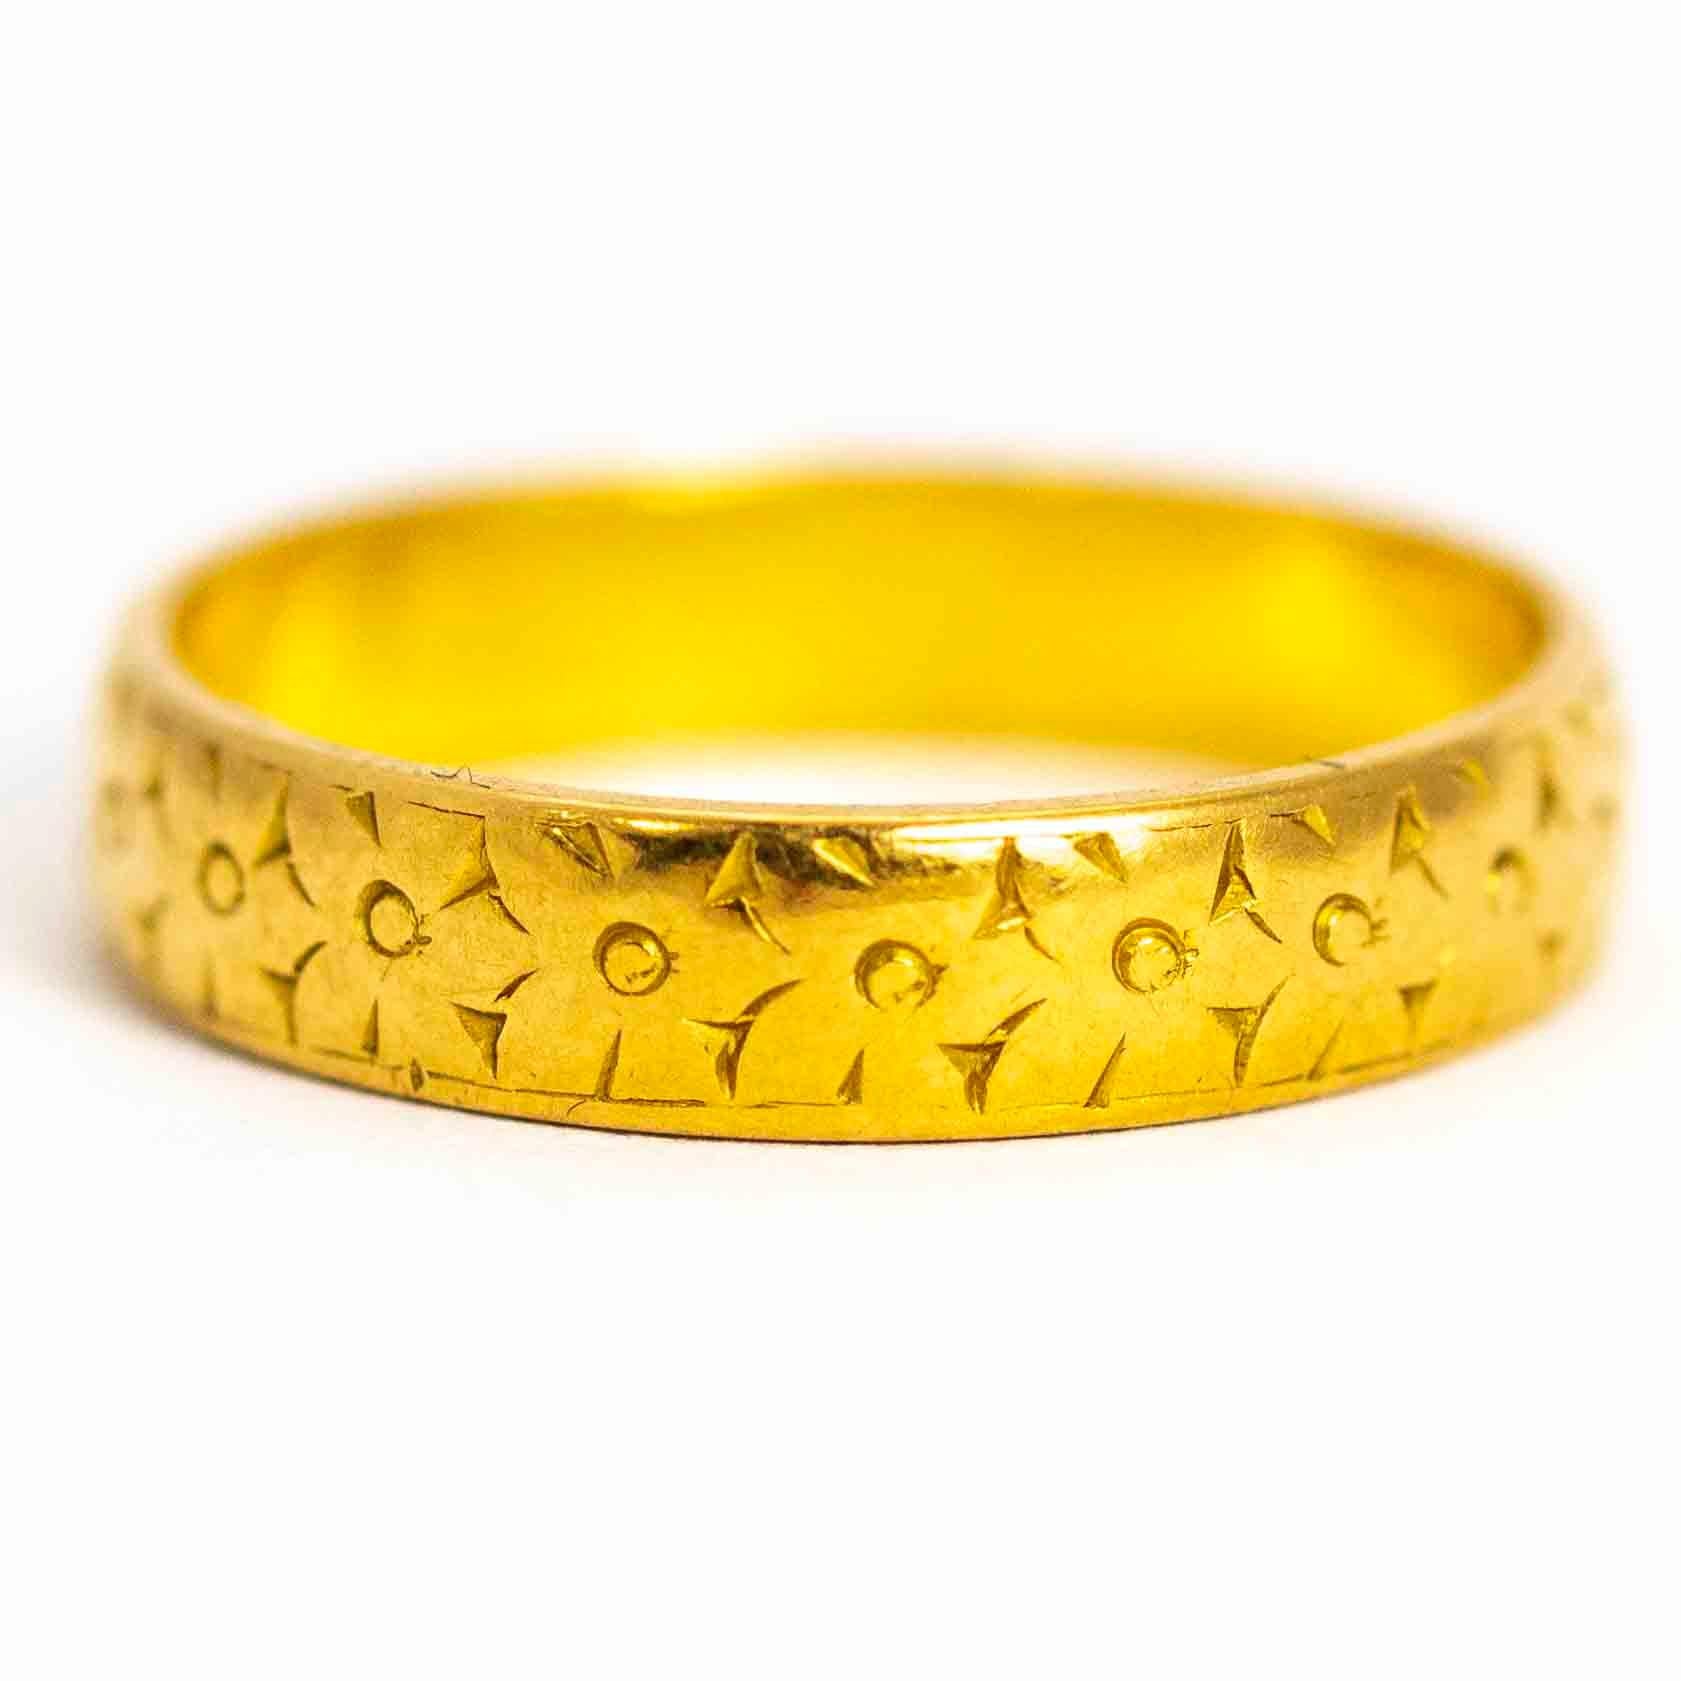 A superb vintage 22 carat yellow gold band fully set with beautiful hand-engraved floral detailing. Fully hallmarked 1957 Birmingham, England.

Ring Size: UK N, US 7